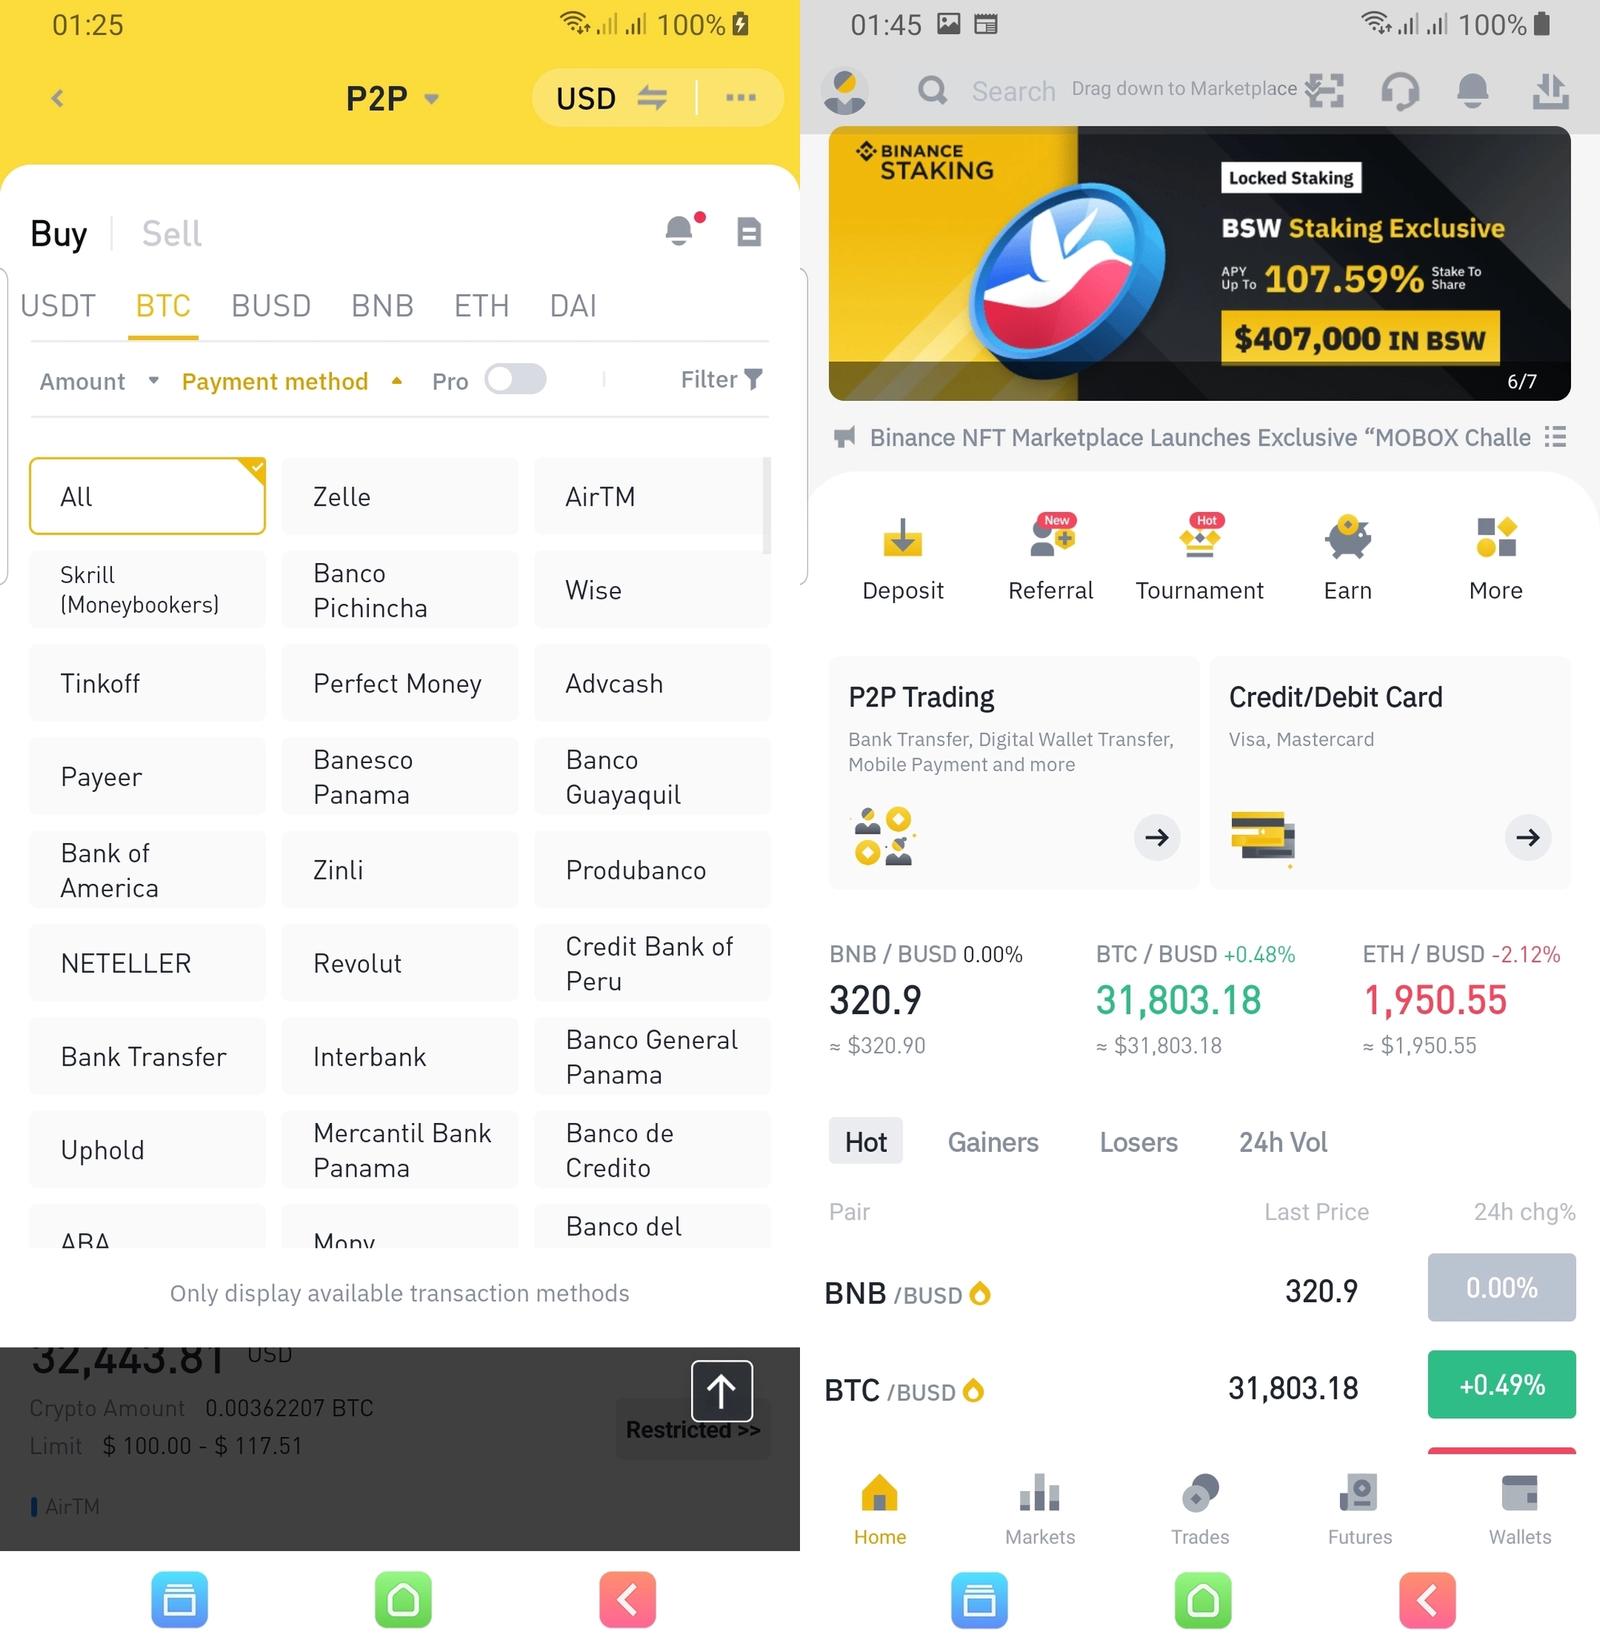 Binance P2P marketplace to buy Bitcoin with PayPal